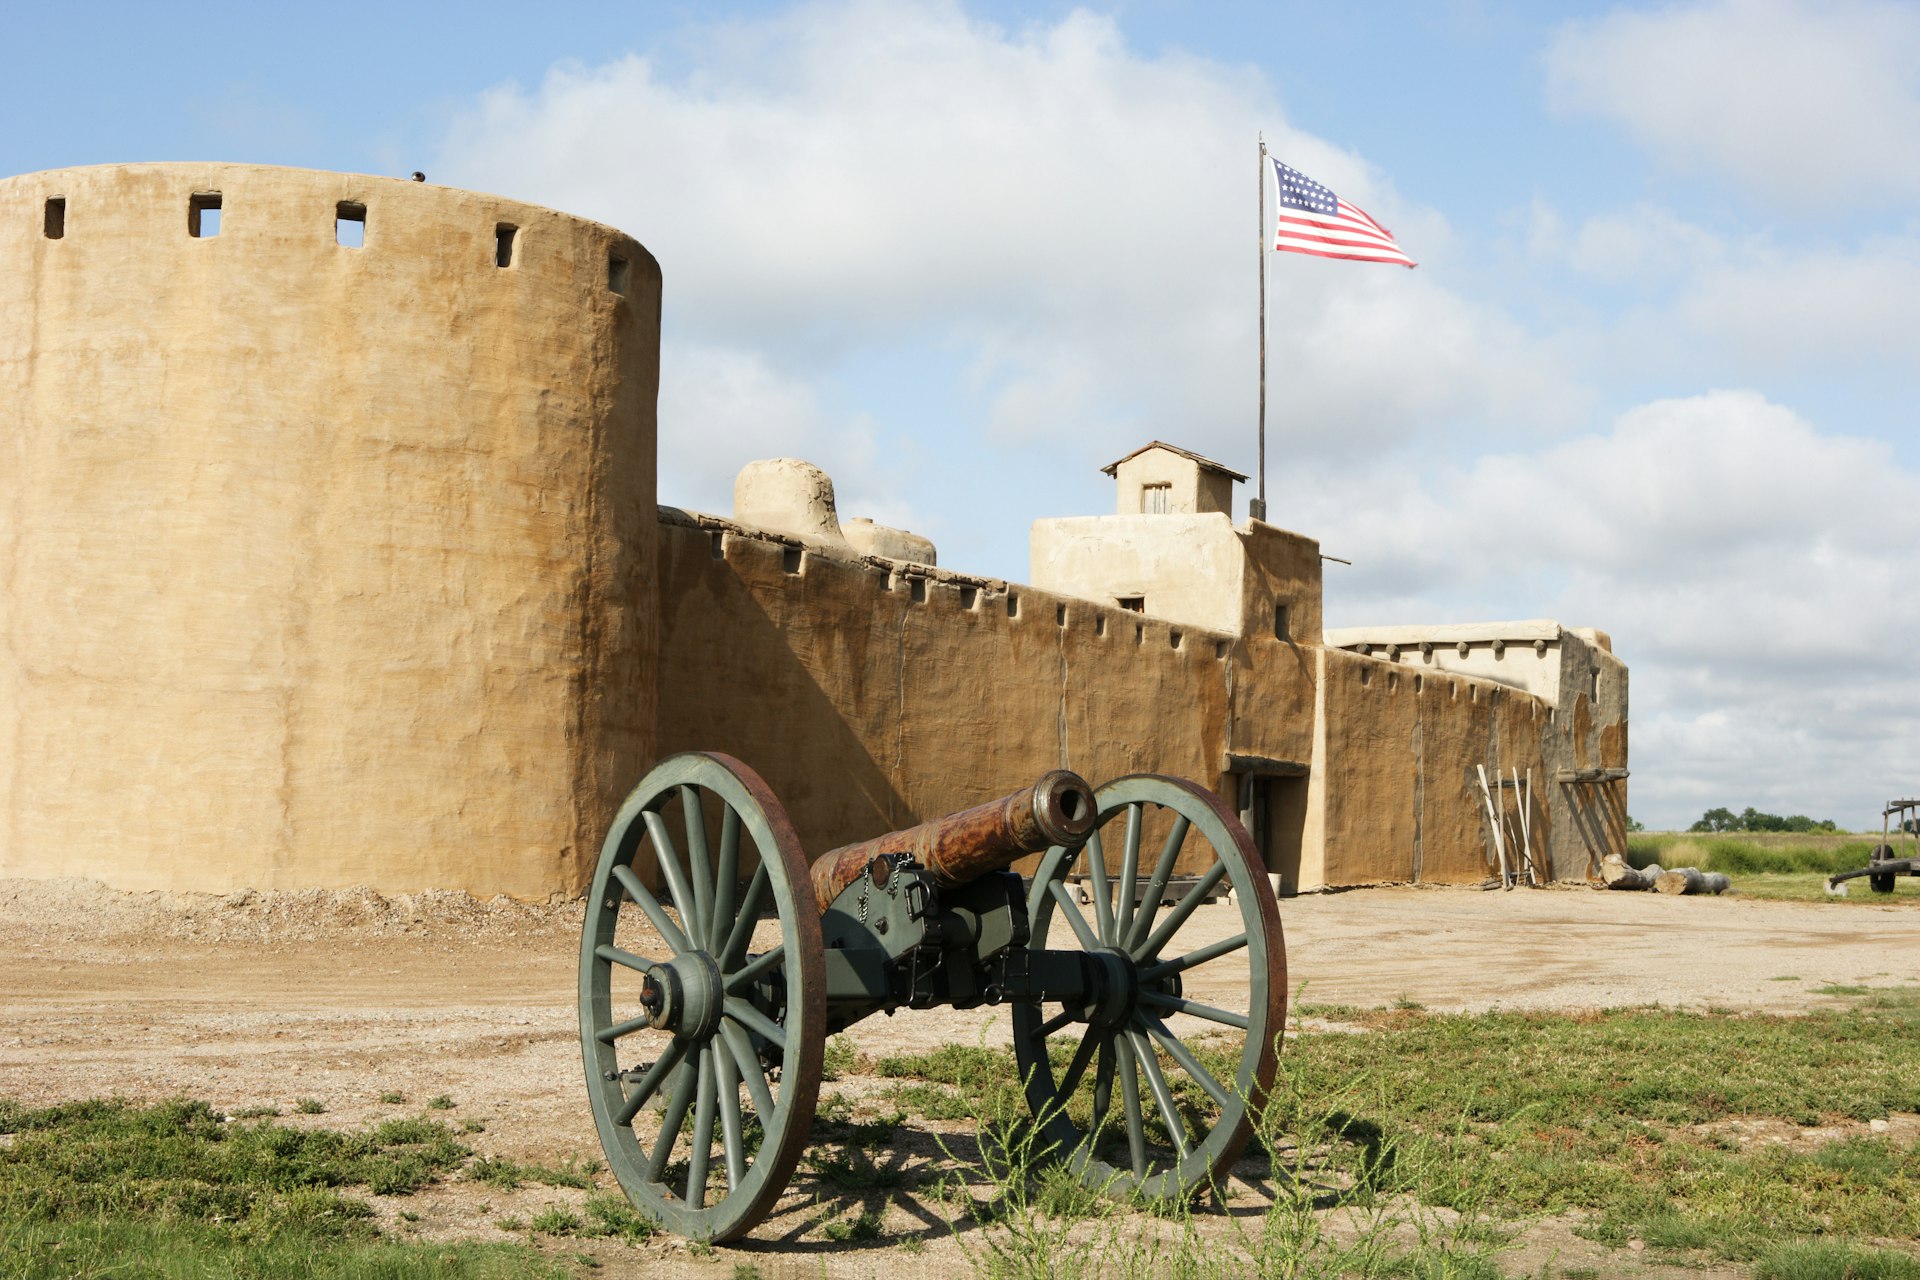 A cannon in front of the solid walls of Bent's Old Fort National Historic Site